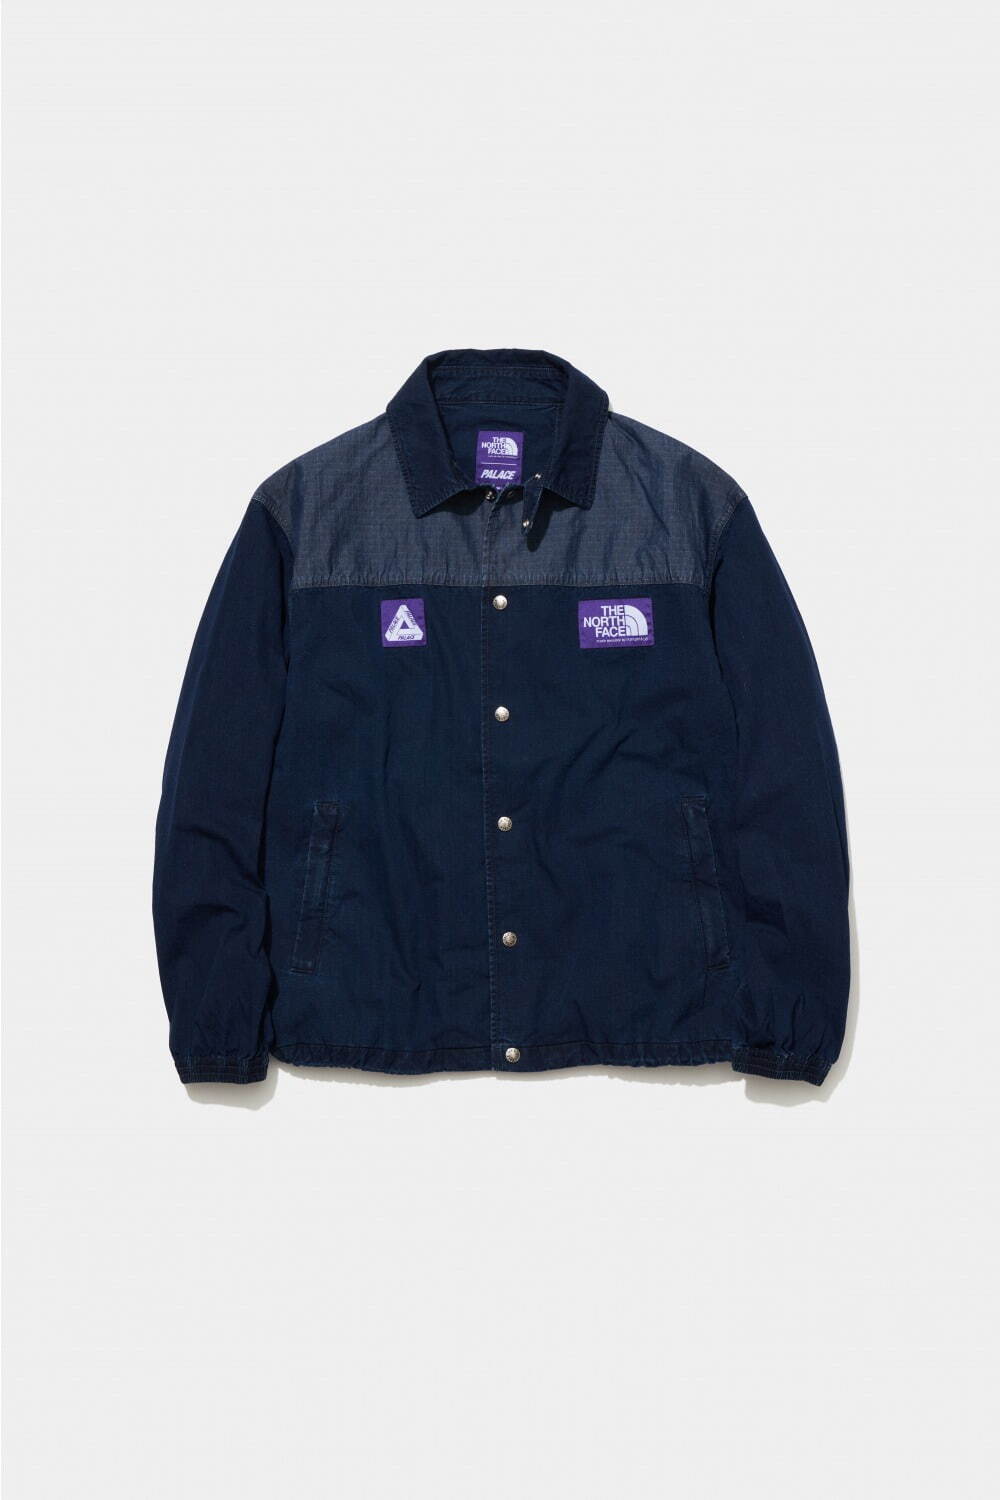 Palace Skateboards The North Face パレスメンズ